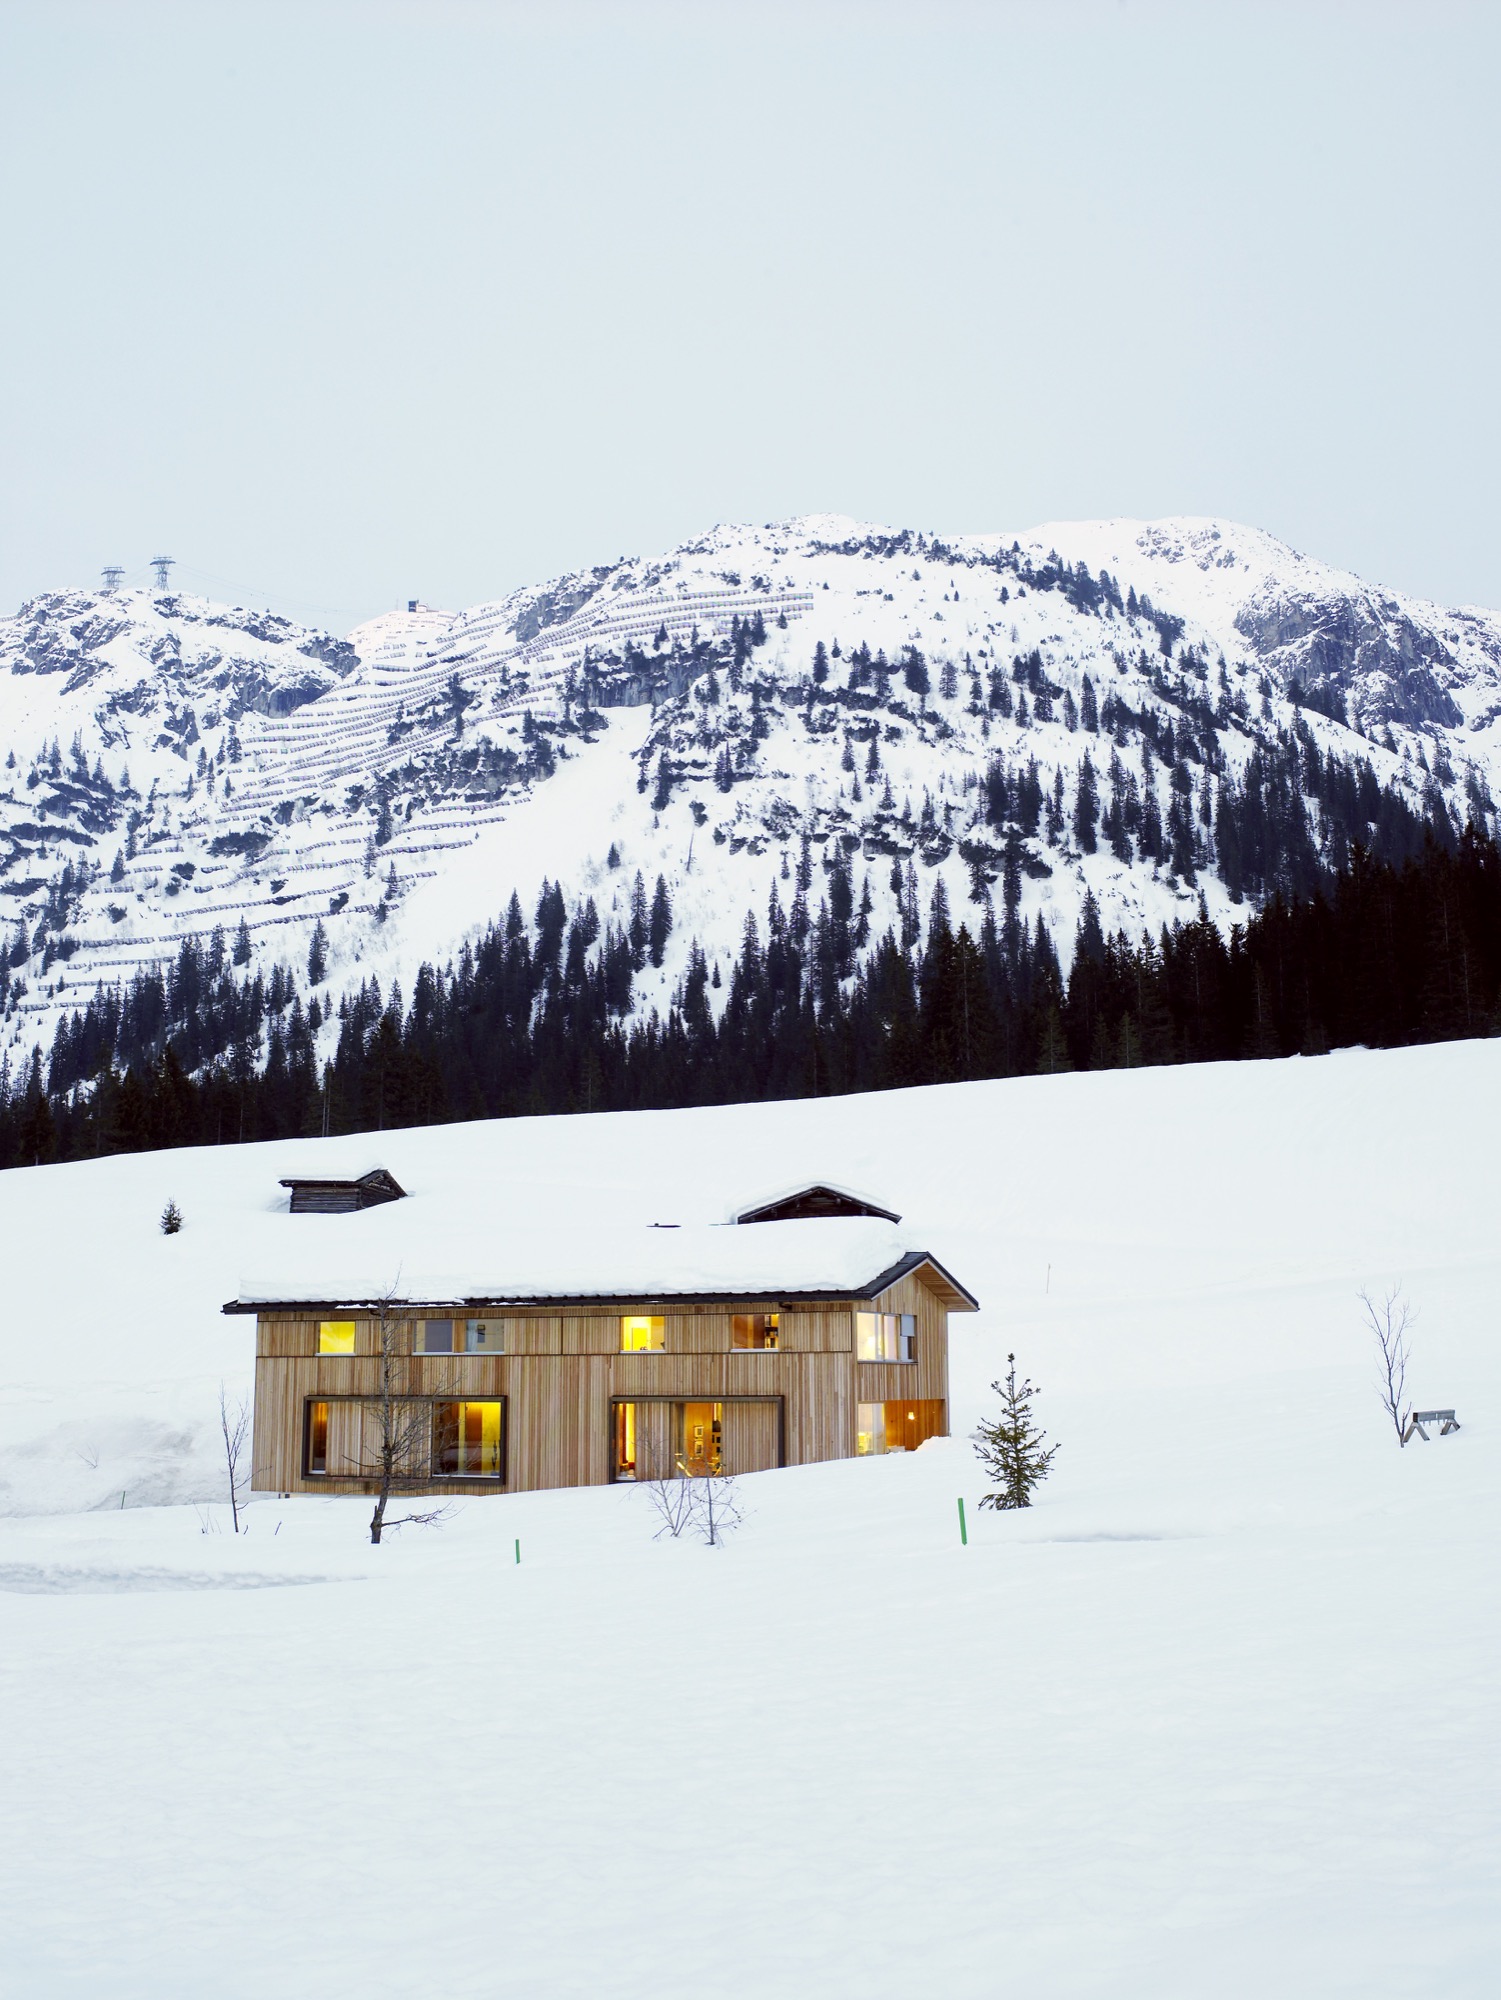 The Strolz House nestles in the winter snow at the edge of the Austrian village of Lech. Large wooden shutters help protect the windows against avalanche damage.